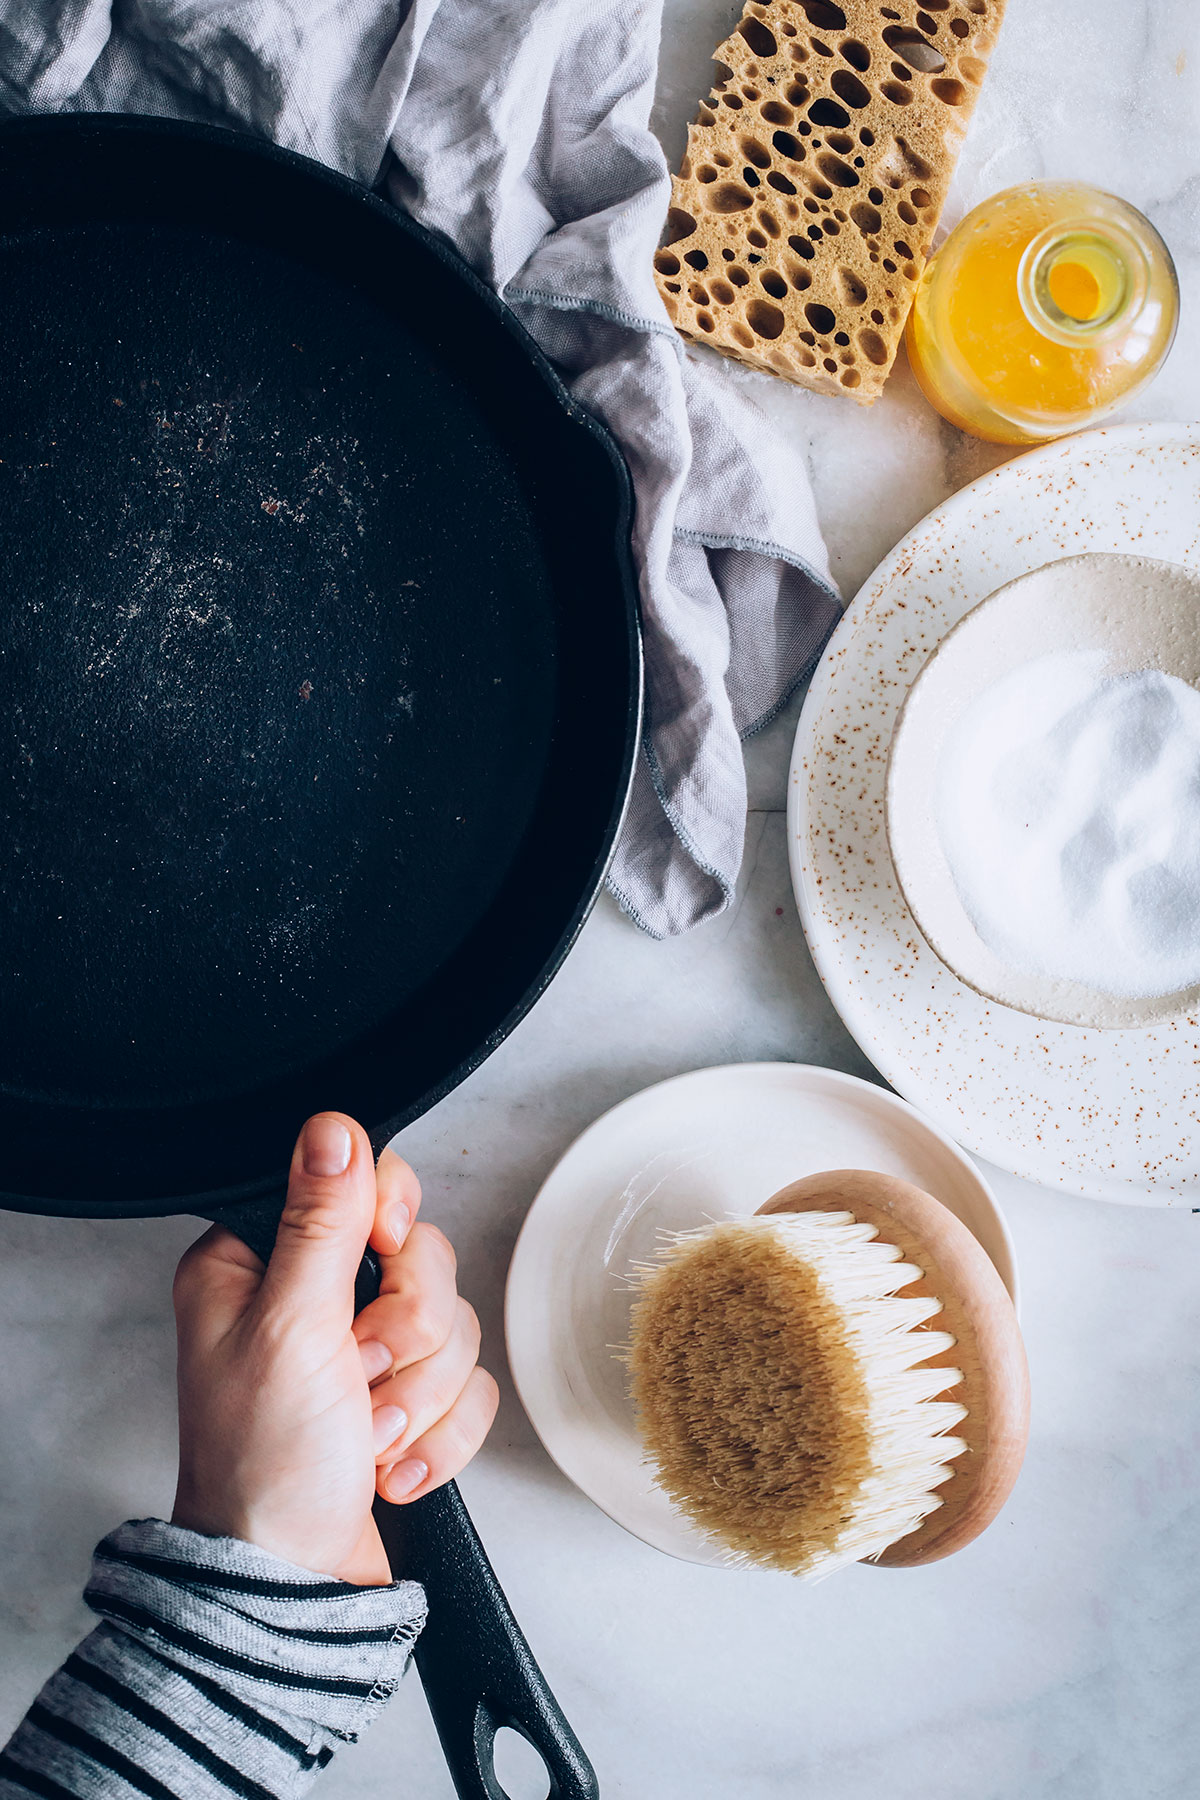 How To Clean Cast Iron Skillets